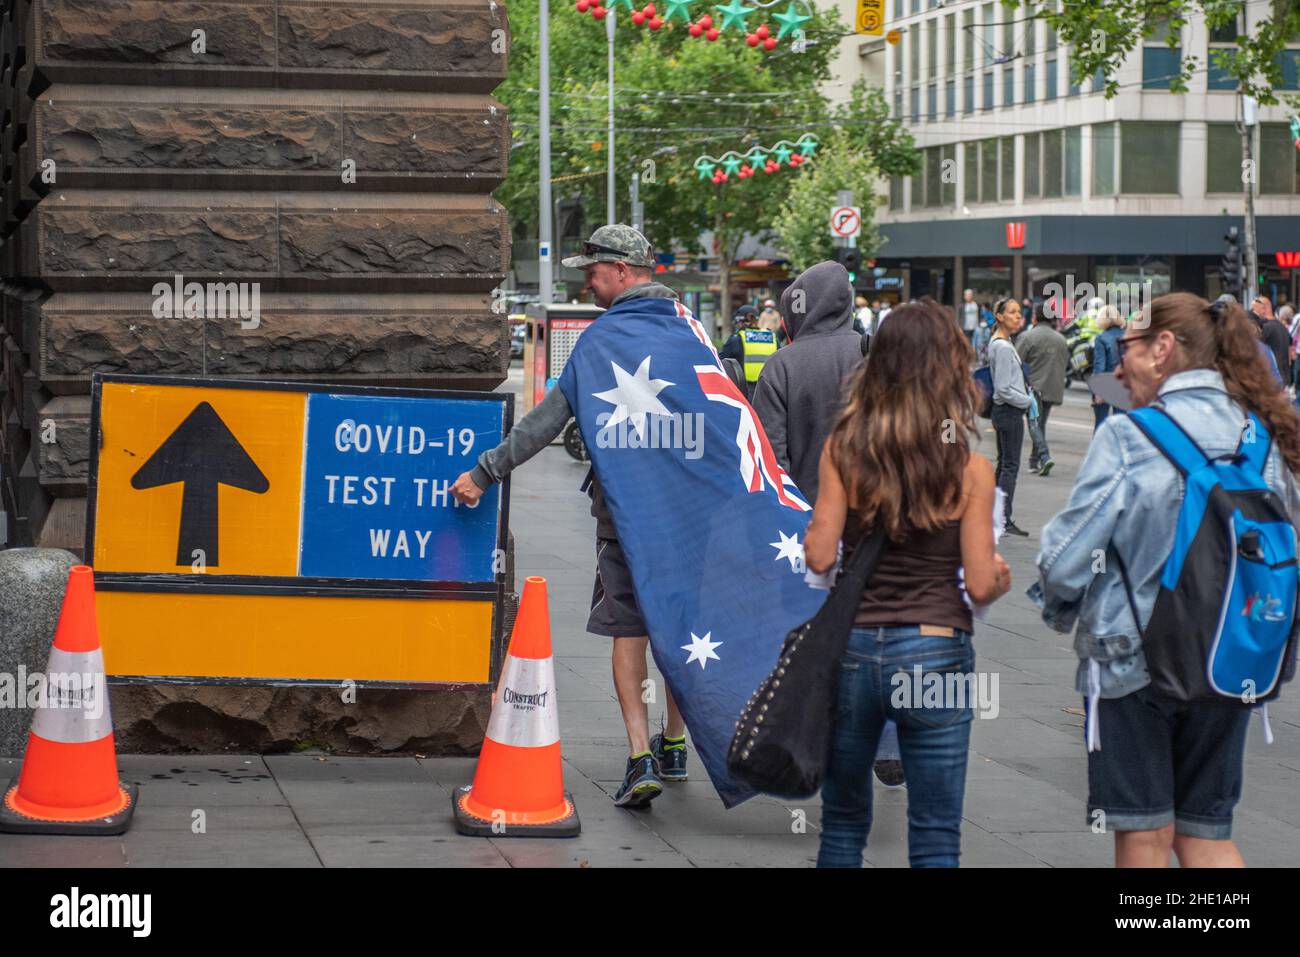 Melbourne, Australia. 8th January 2022, Melbourne, Australia. An anti-vax protester wearing the Australian flag hits his fist against a COVID testing sign at the Melbourne Town Hall testing site. Credit: Jay Kogler/Alamy Live News Stock Photo